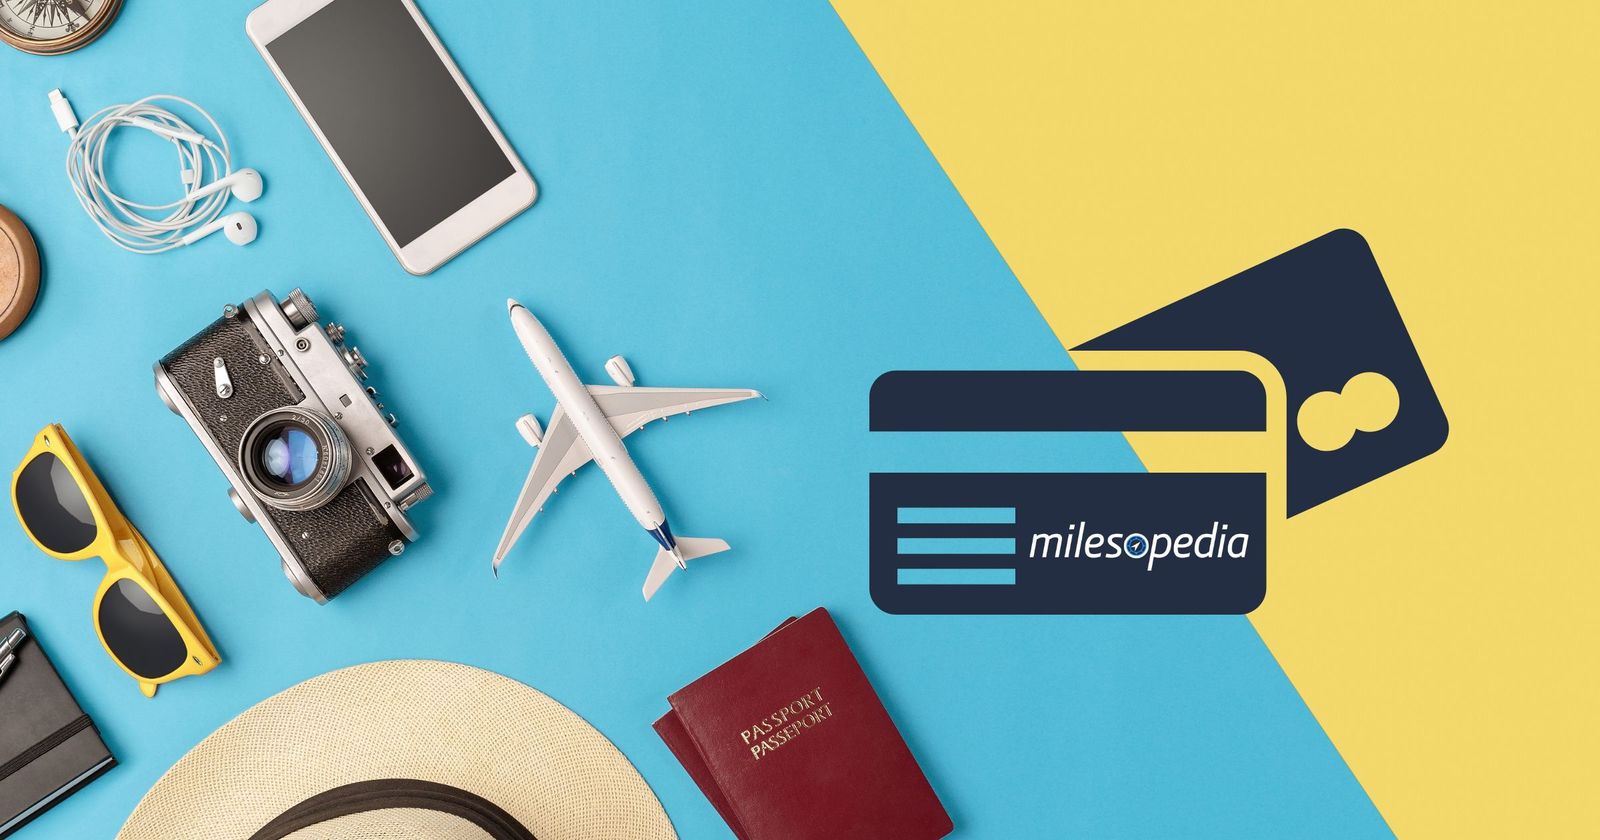 the best milesopedia credit cards presented